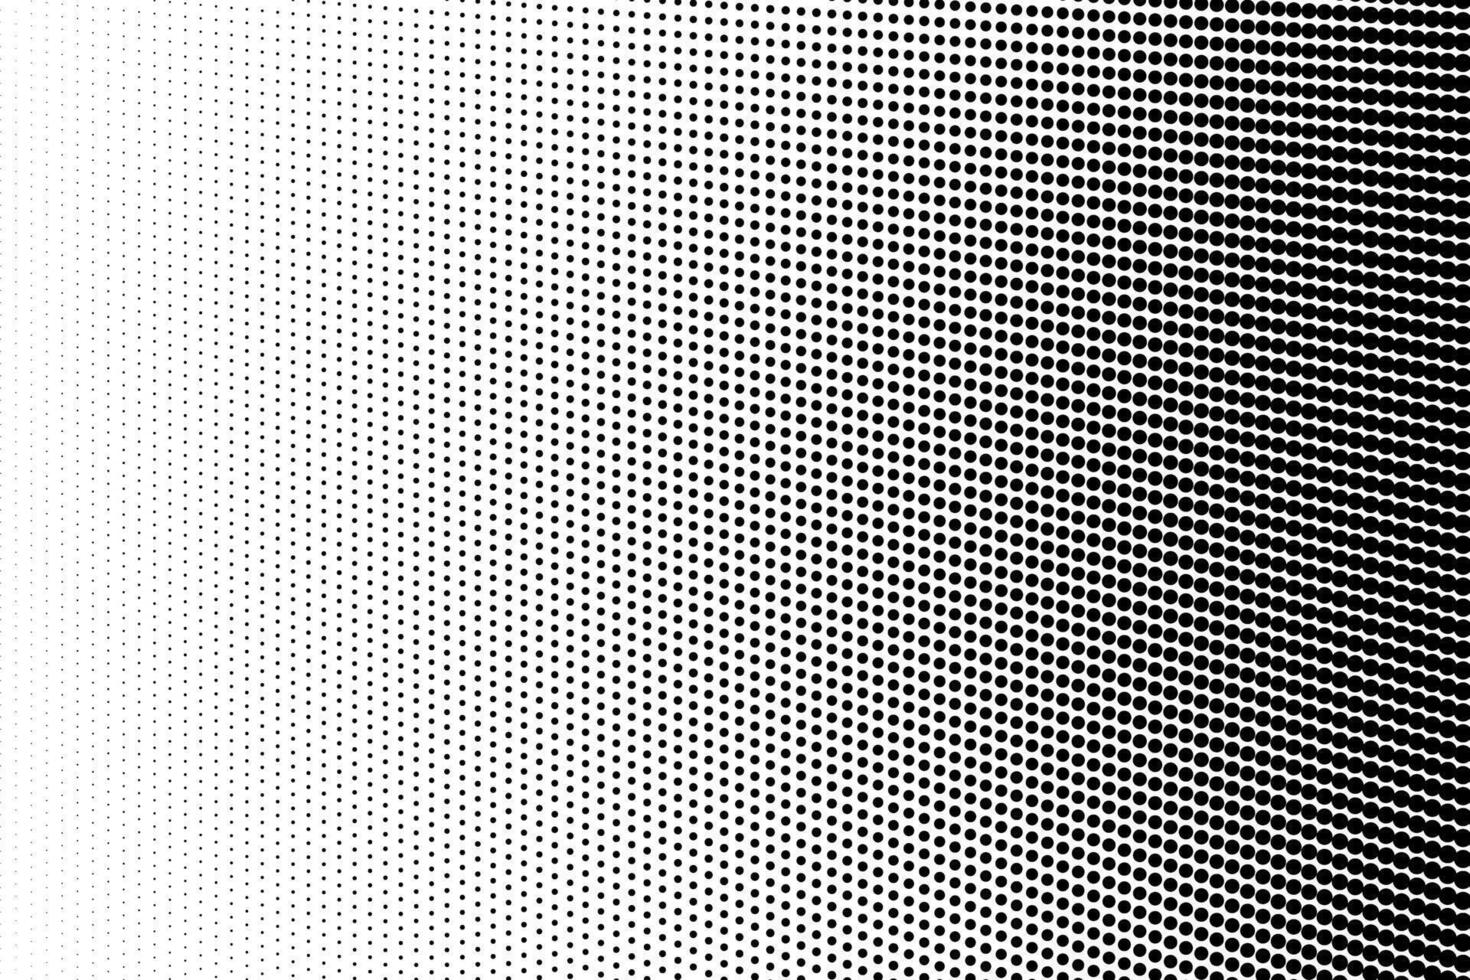 Gradient dotted halftone background. Halftone pattern texture overlay. Abstract black, white, dots. Vector illustration